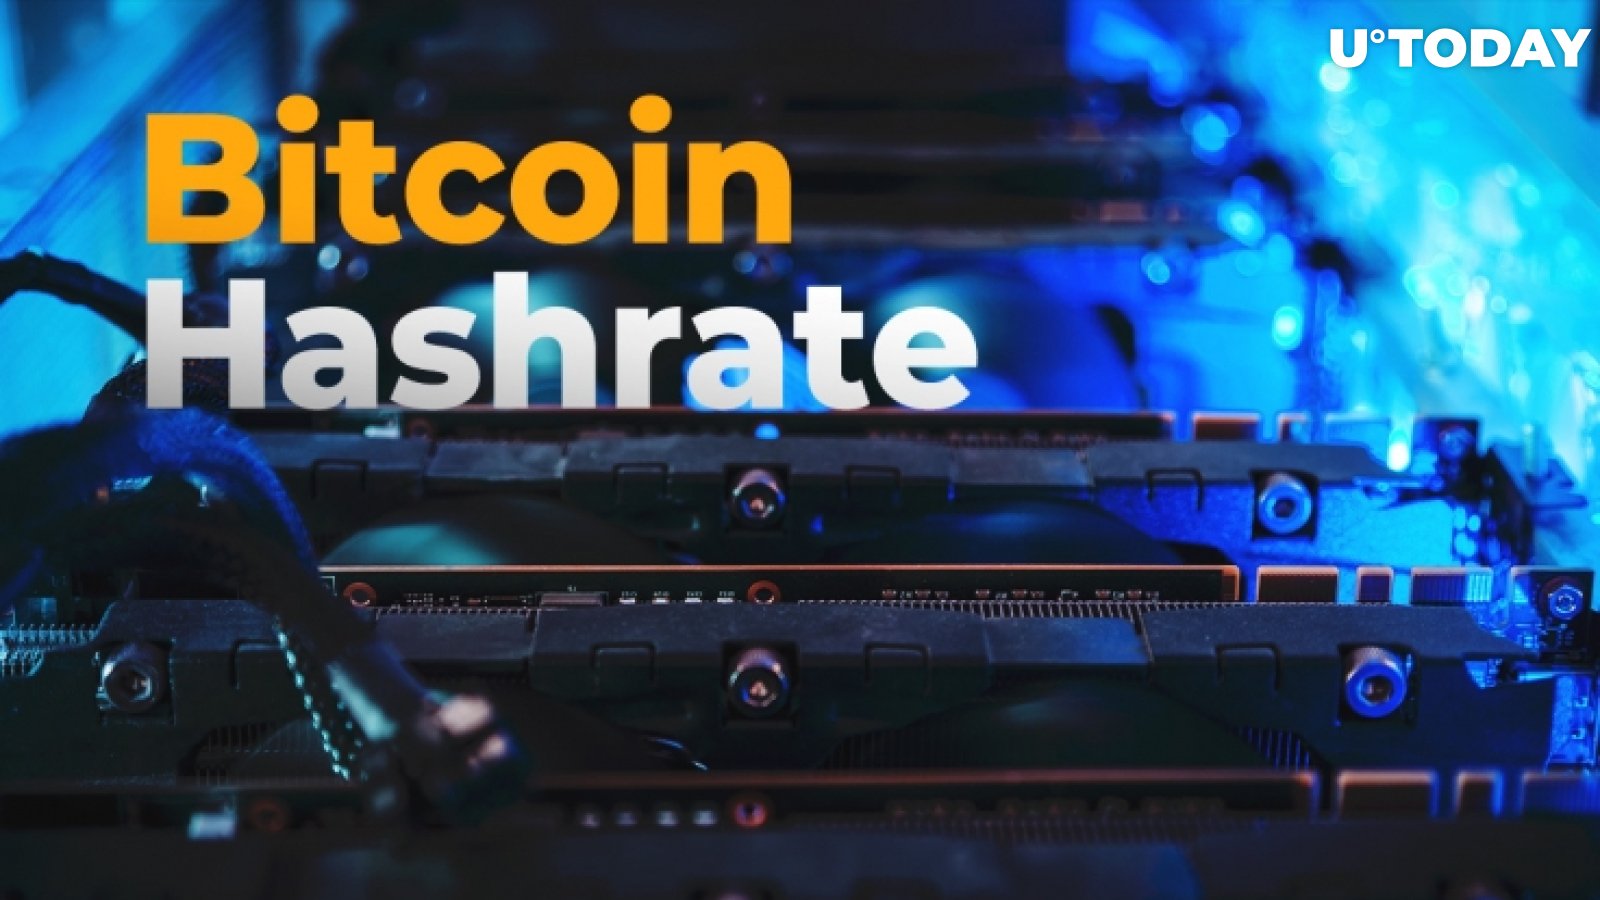 Bitcoin Hashrate Hits New All-Time High Eight Days Before BTC Halving